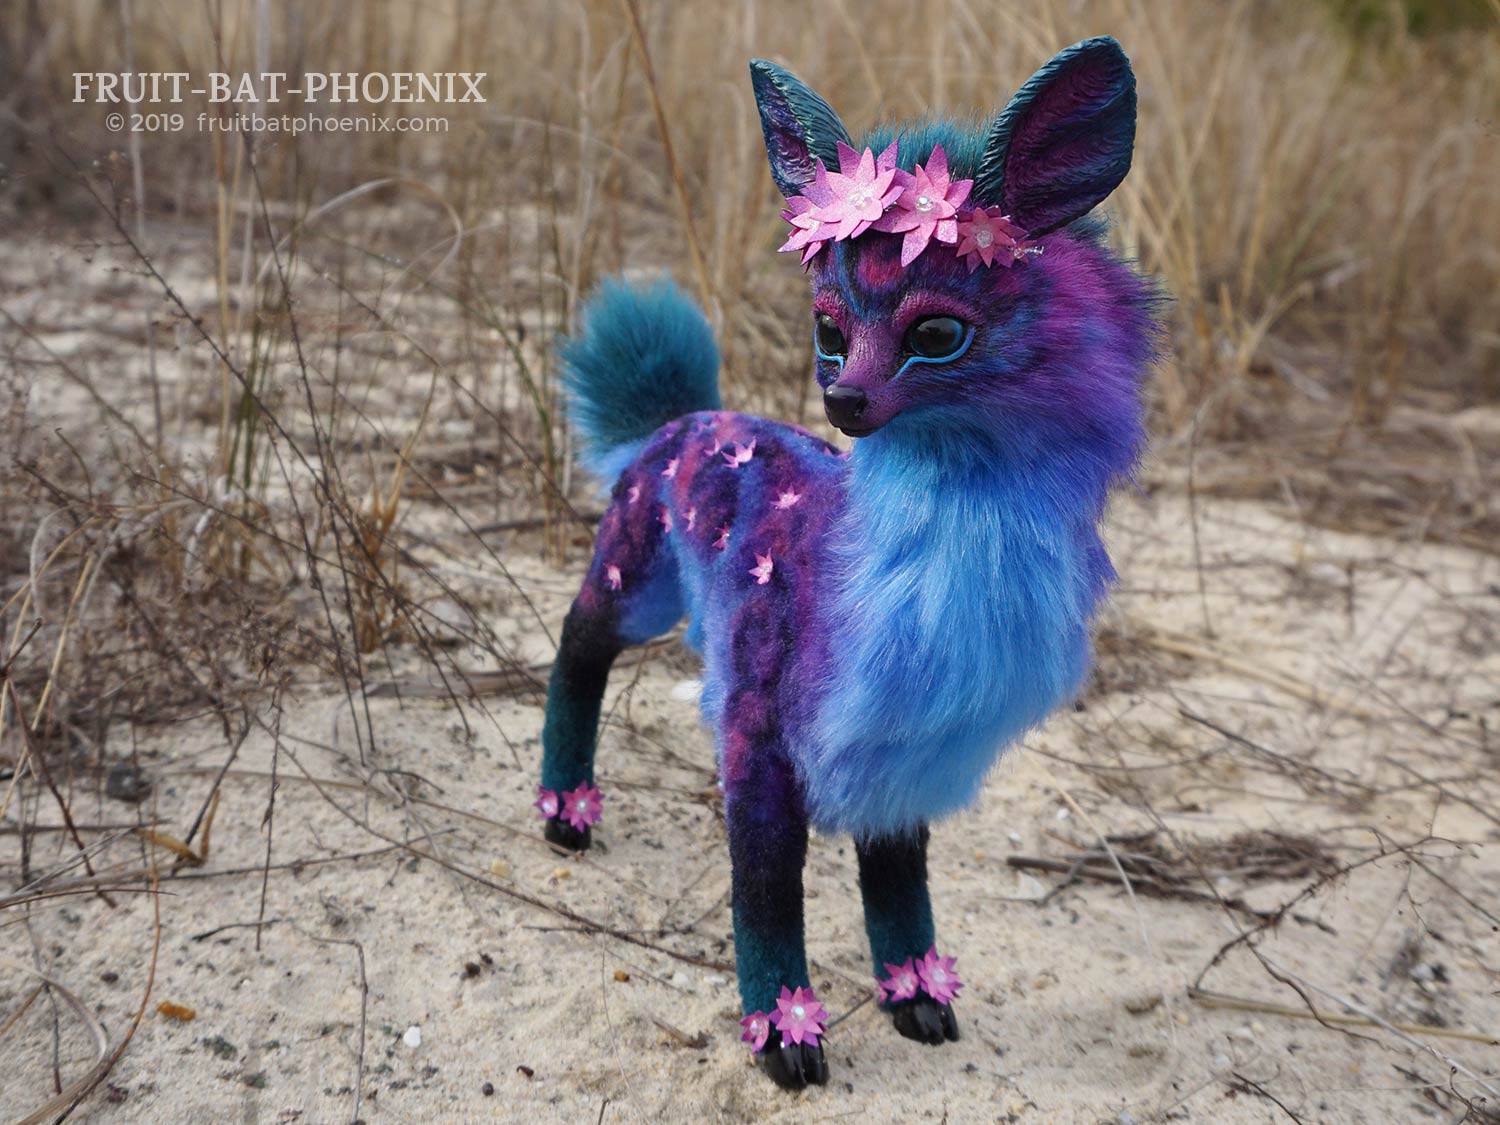 Galaxy Doe, the posable fantasy creature doll, looks over her shoulder